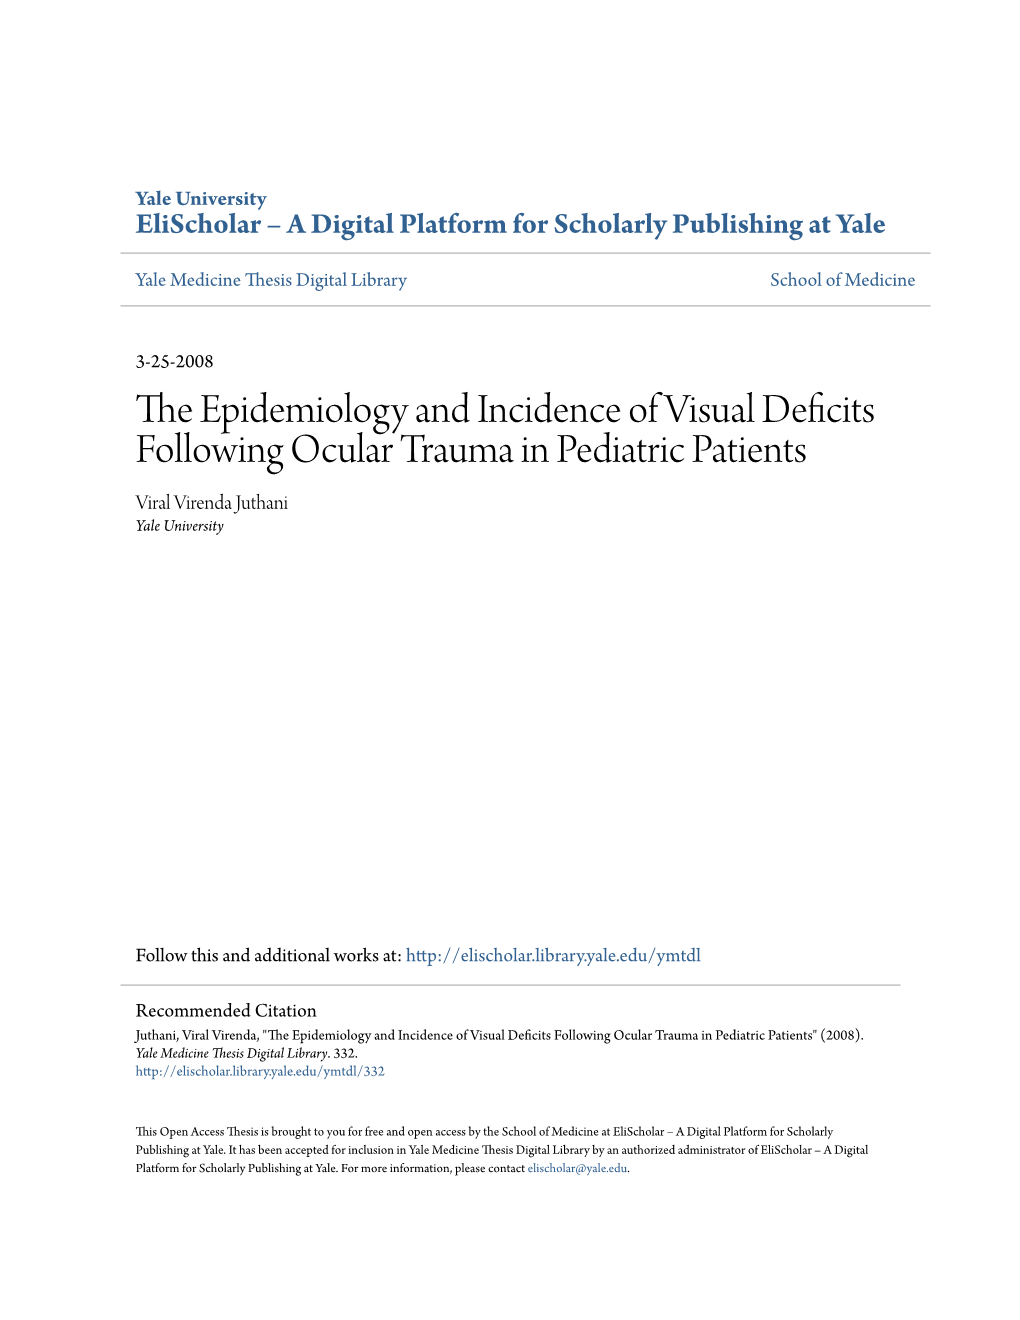 The Epidemiology and Incidence of Visual Deficits Following Ocular Trauma in Pediatric Patients